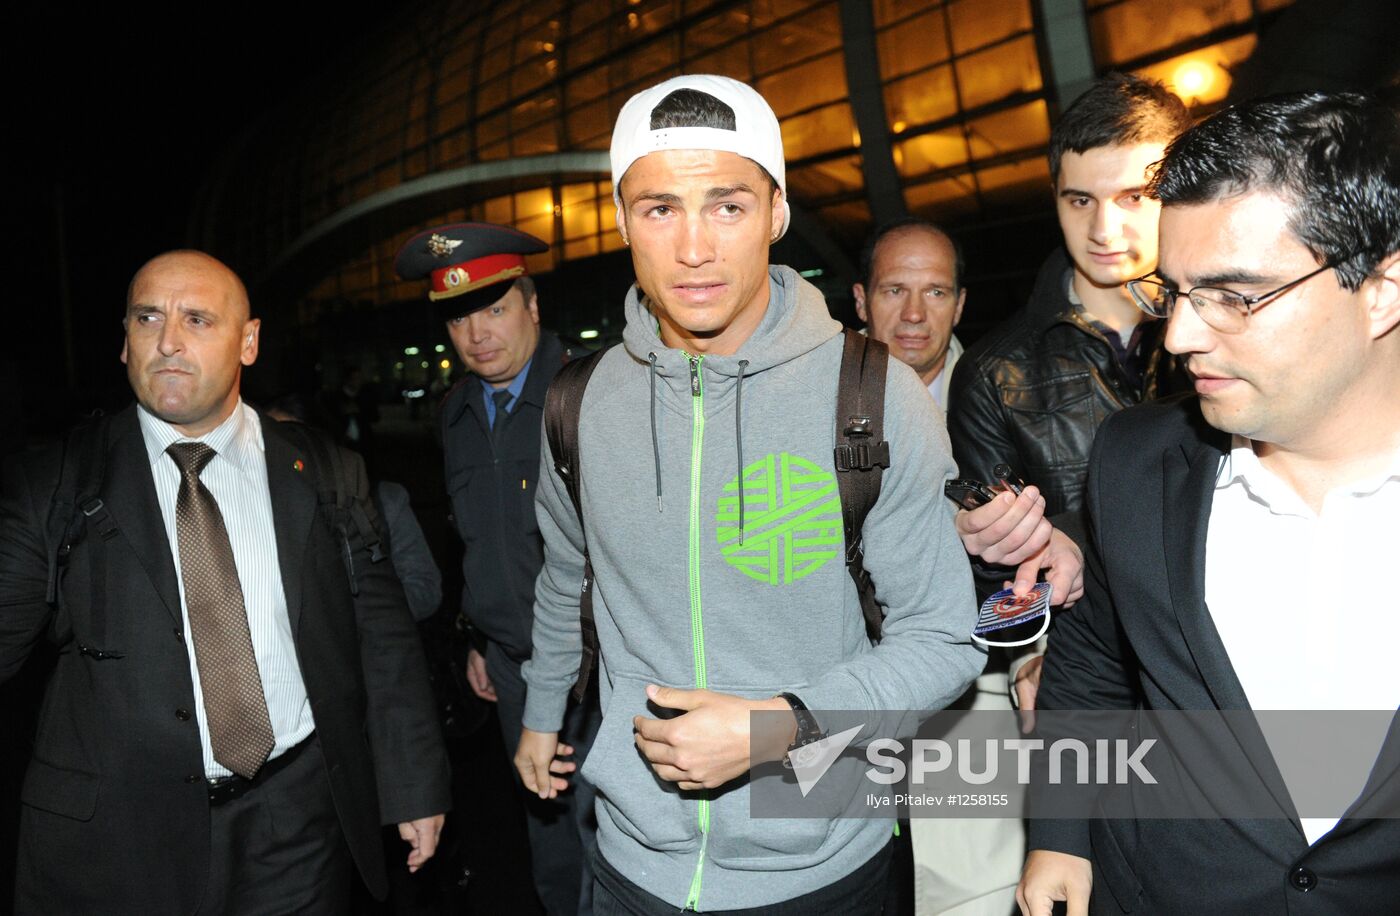 Portugal's national football team arrives in Russia